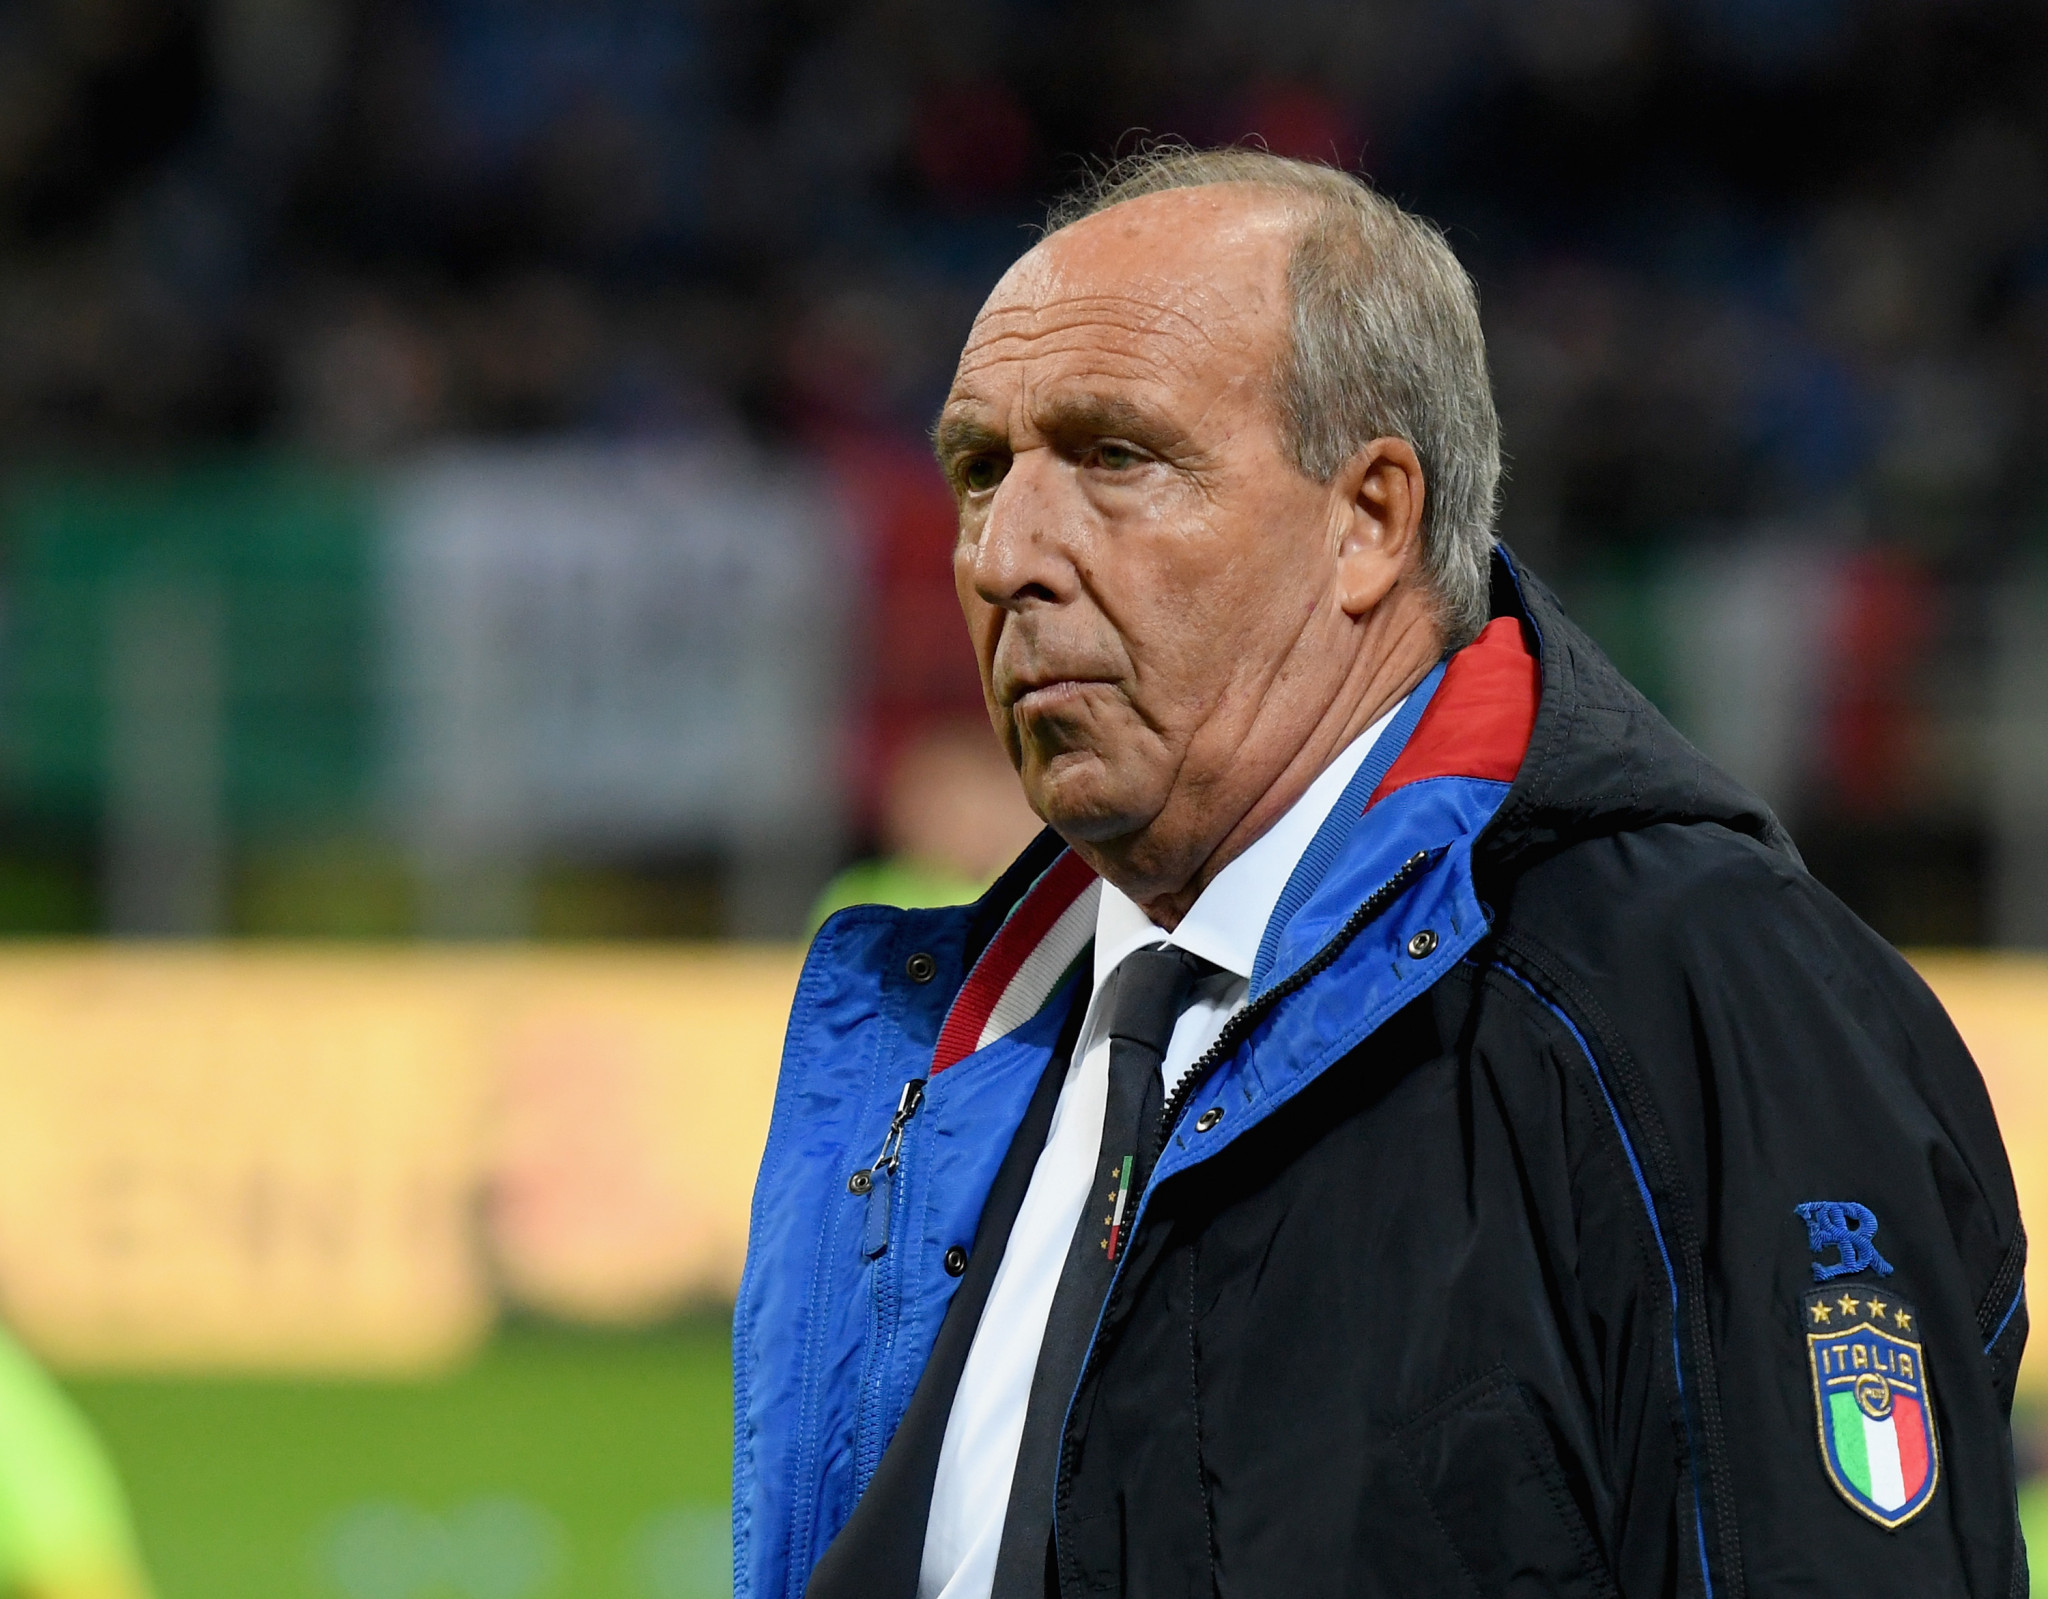 Gian Piero Ventura was sacked after Italy's coach after they failed to qualify for the first time since 1958 ©Getty Images